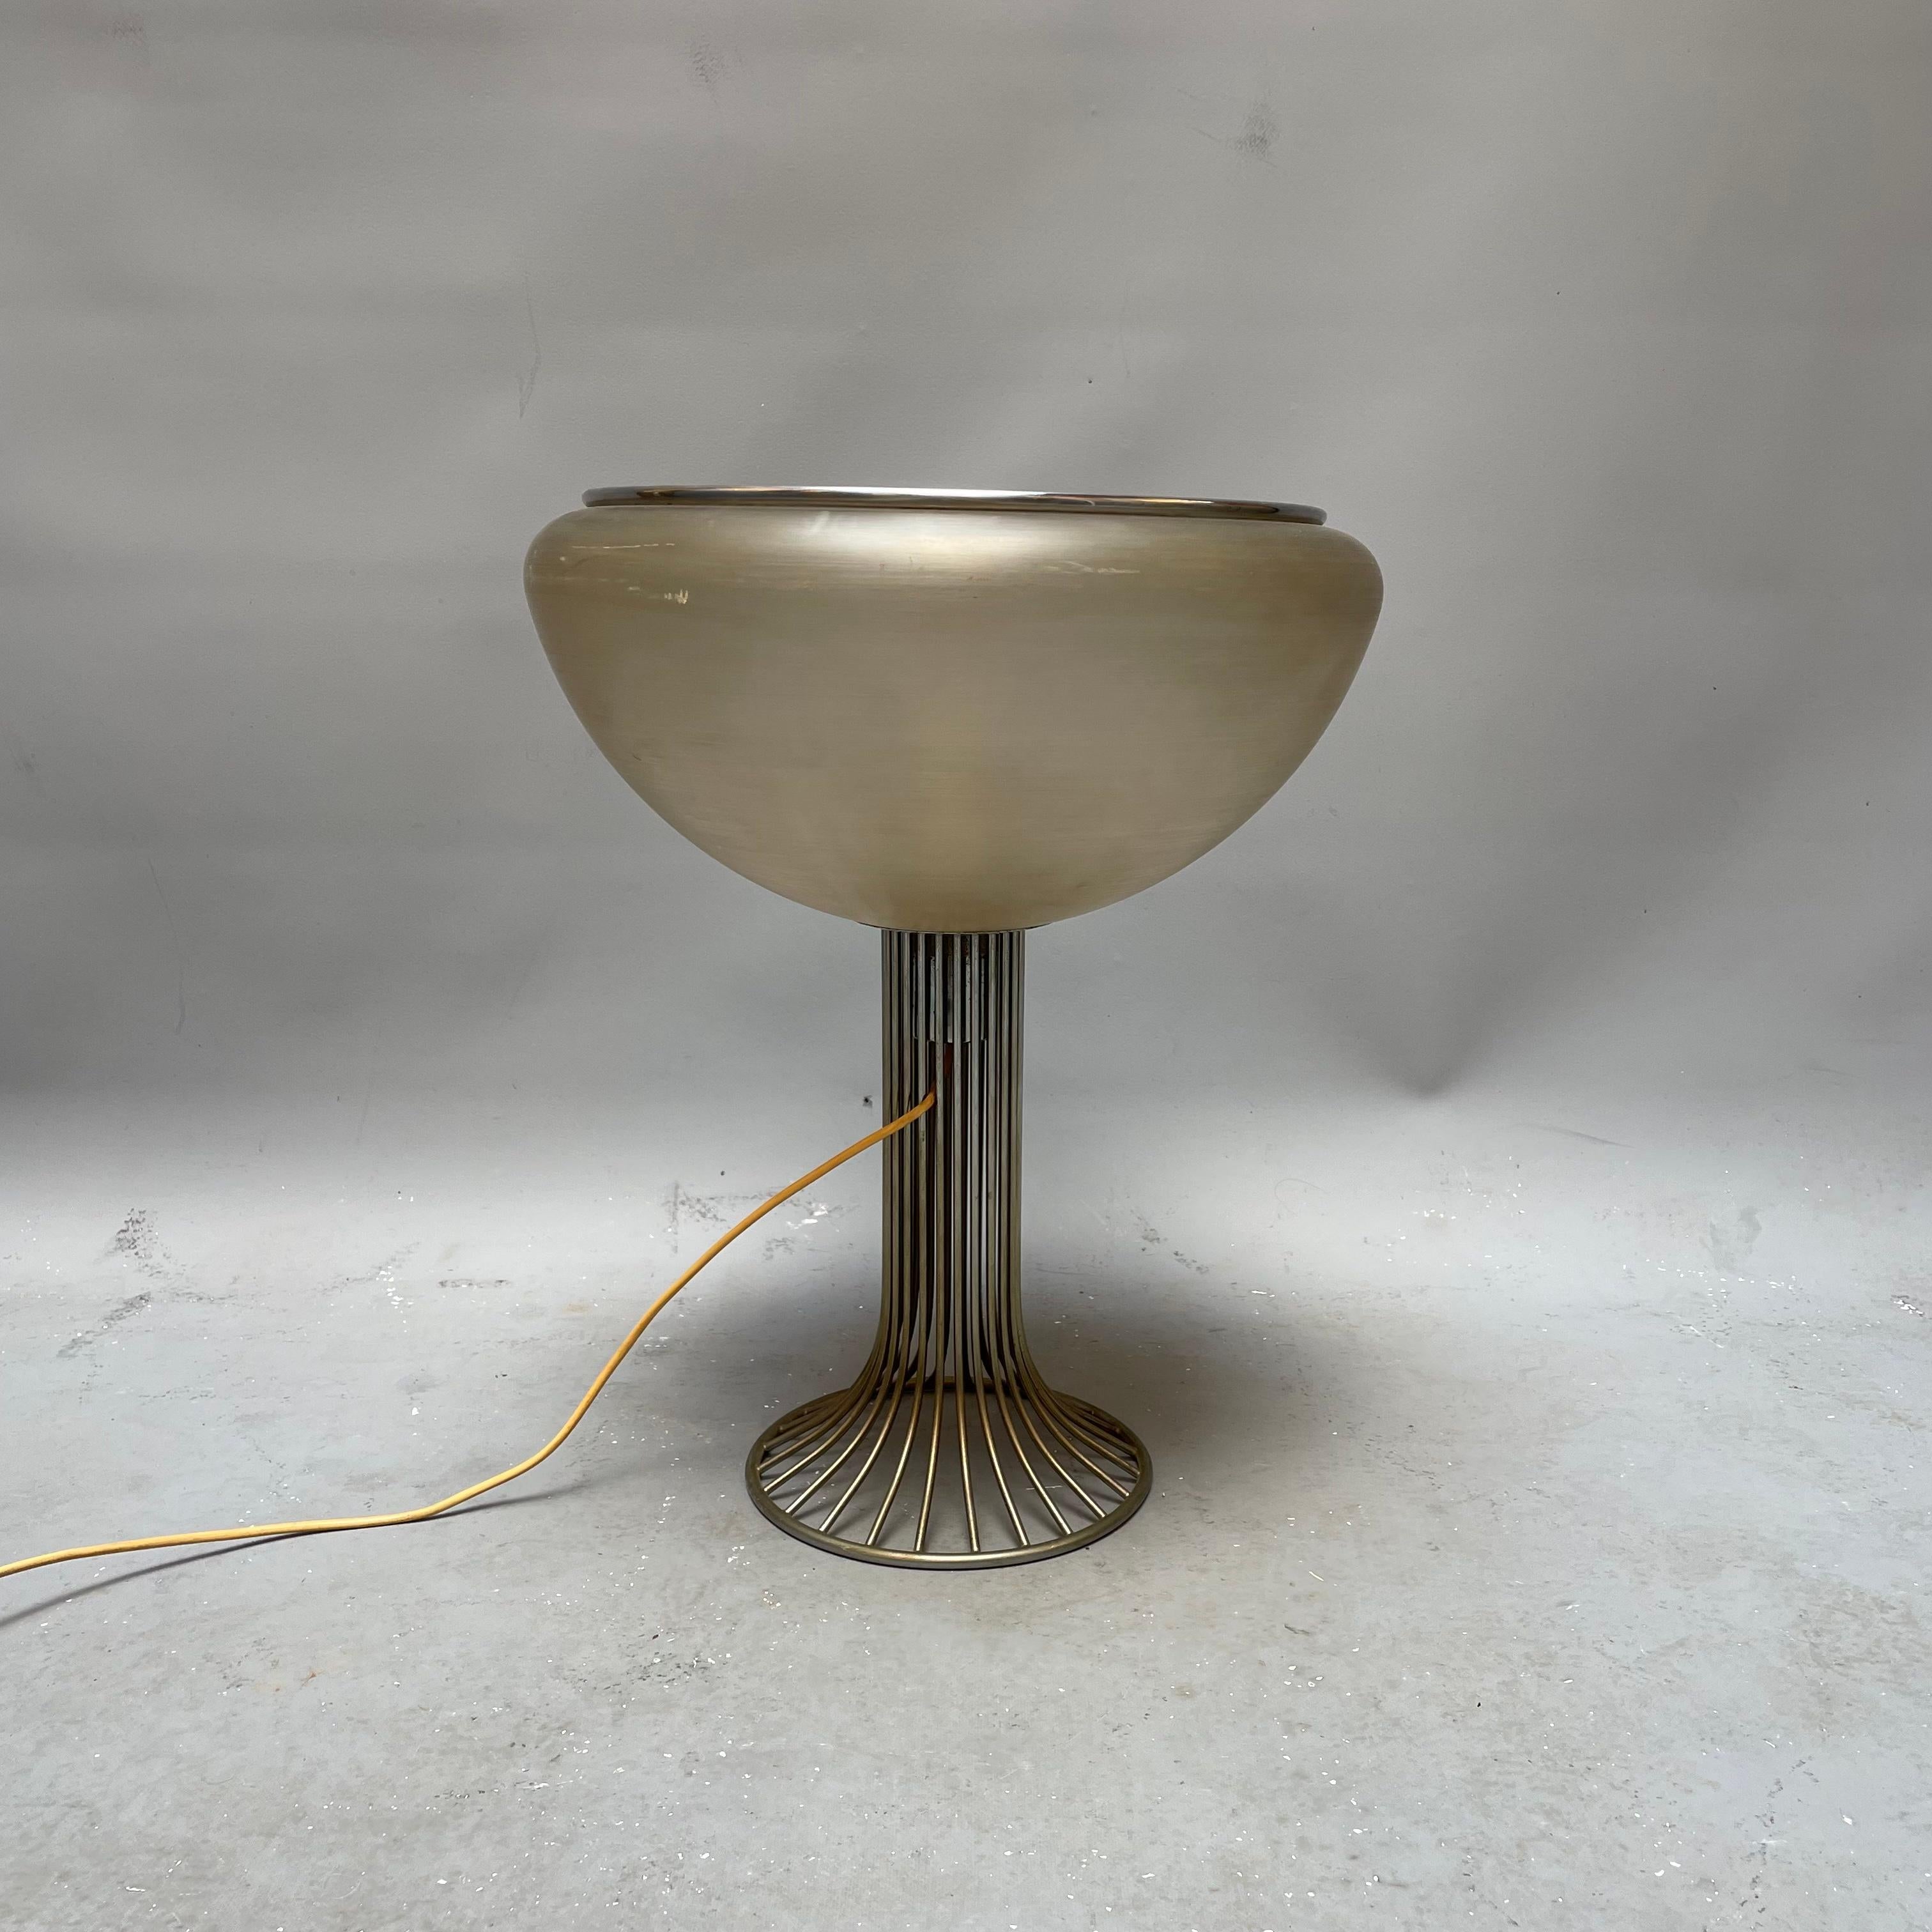 A lamp by Luigi Massoni, Italian designer born in Milan in 1930. Fundamental was the collaboration he began in 1962 with the Guzzini group, for which he not only designed numerous products (the Brumbry lamp, the Bolo Cubo bowls, 1962, and the